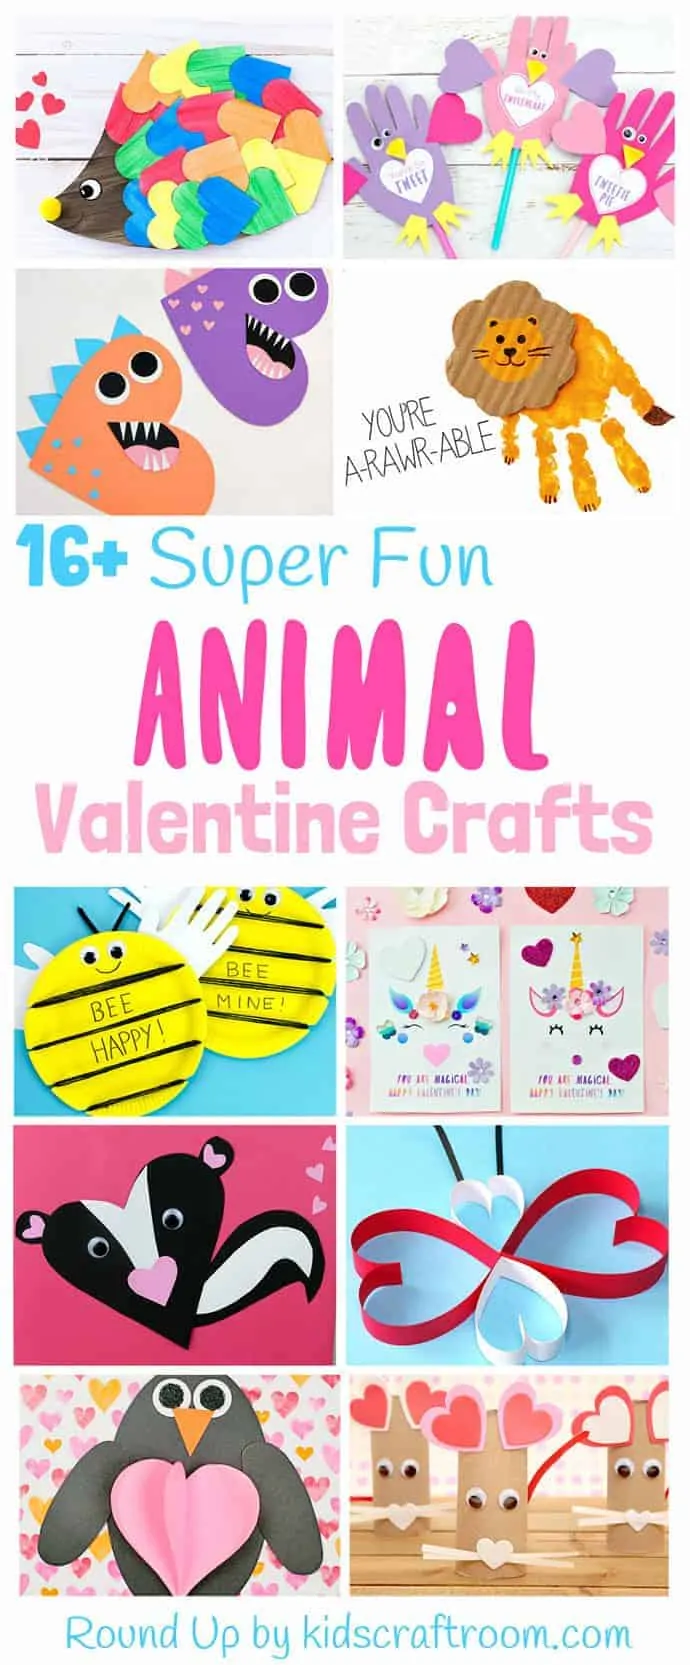 ANIMAL VALENTINE CRAFTS FOR KIDS - Need something a bit fun and different for Valentine's Day? How about these cool Animal Valentines? They're not too soppy so your boys and girls will love them! #valentines #valentinesday #valentinecraft #valentinecrafts #animalcrafts #animal #kidscrafts #craftsforkids #kidscraftideas #kidsactivities #crafts #craft #preschool #preschoolcraft #toddlercrafts #prek #craftideas 